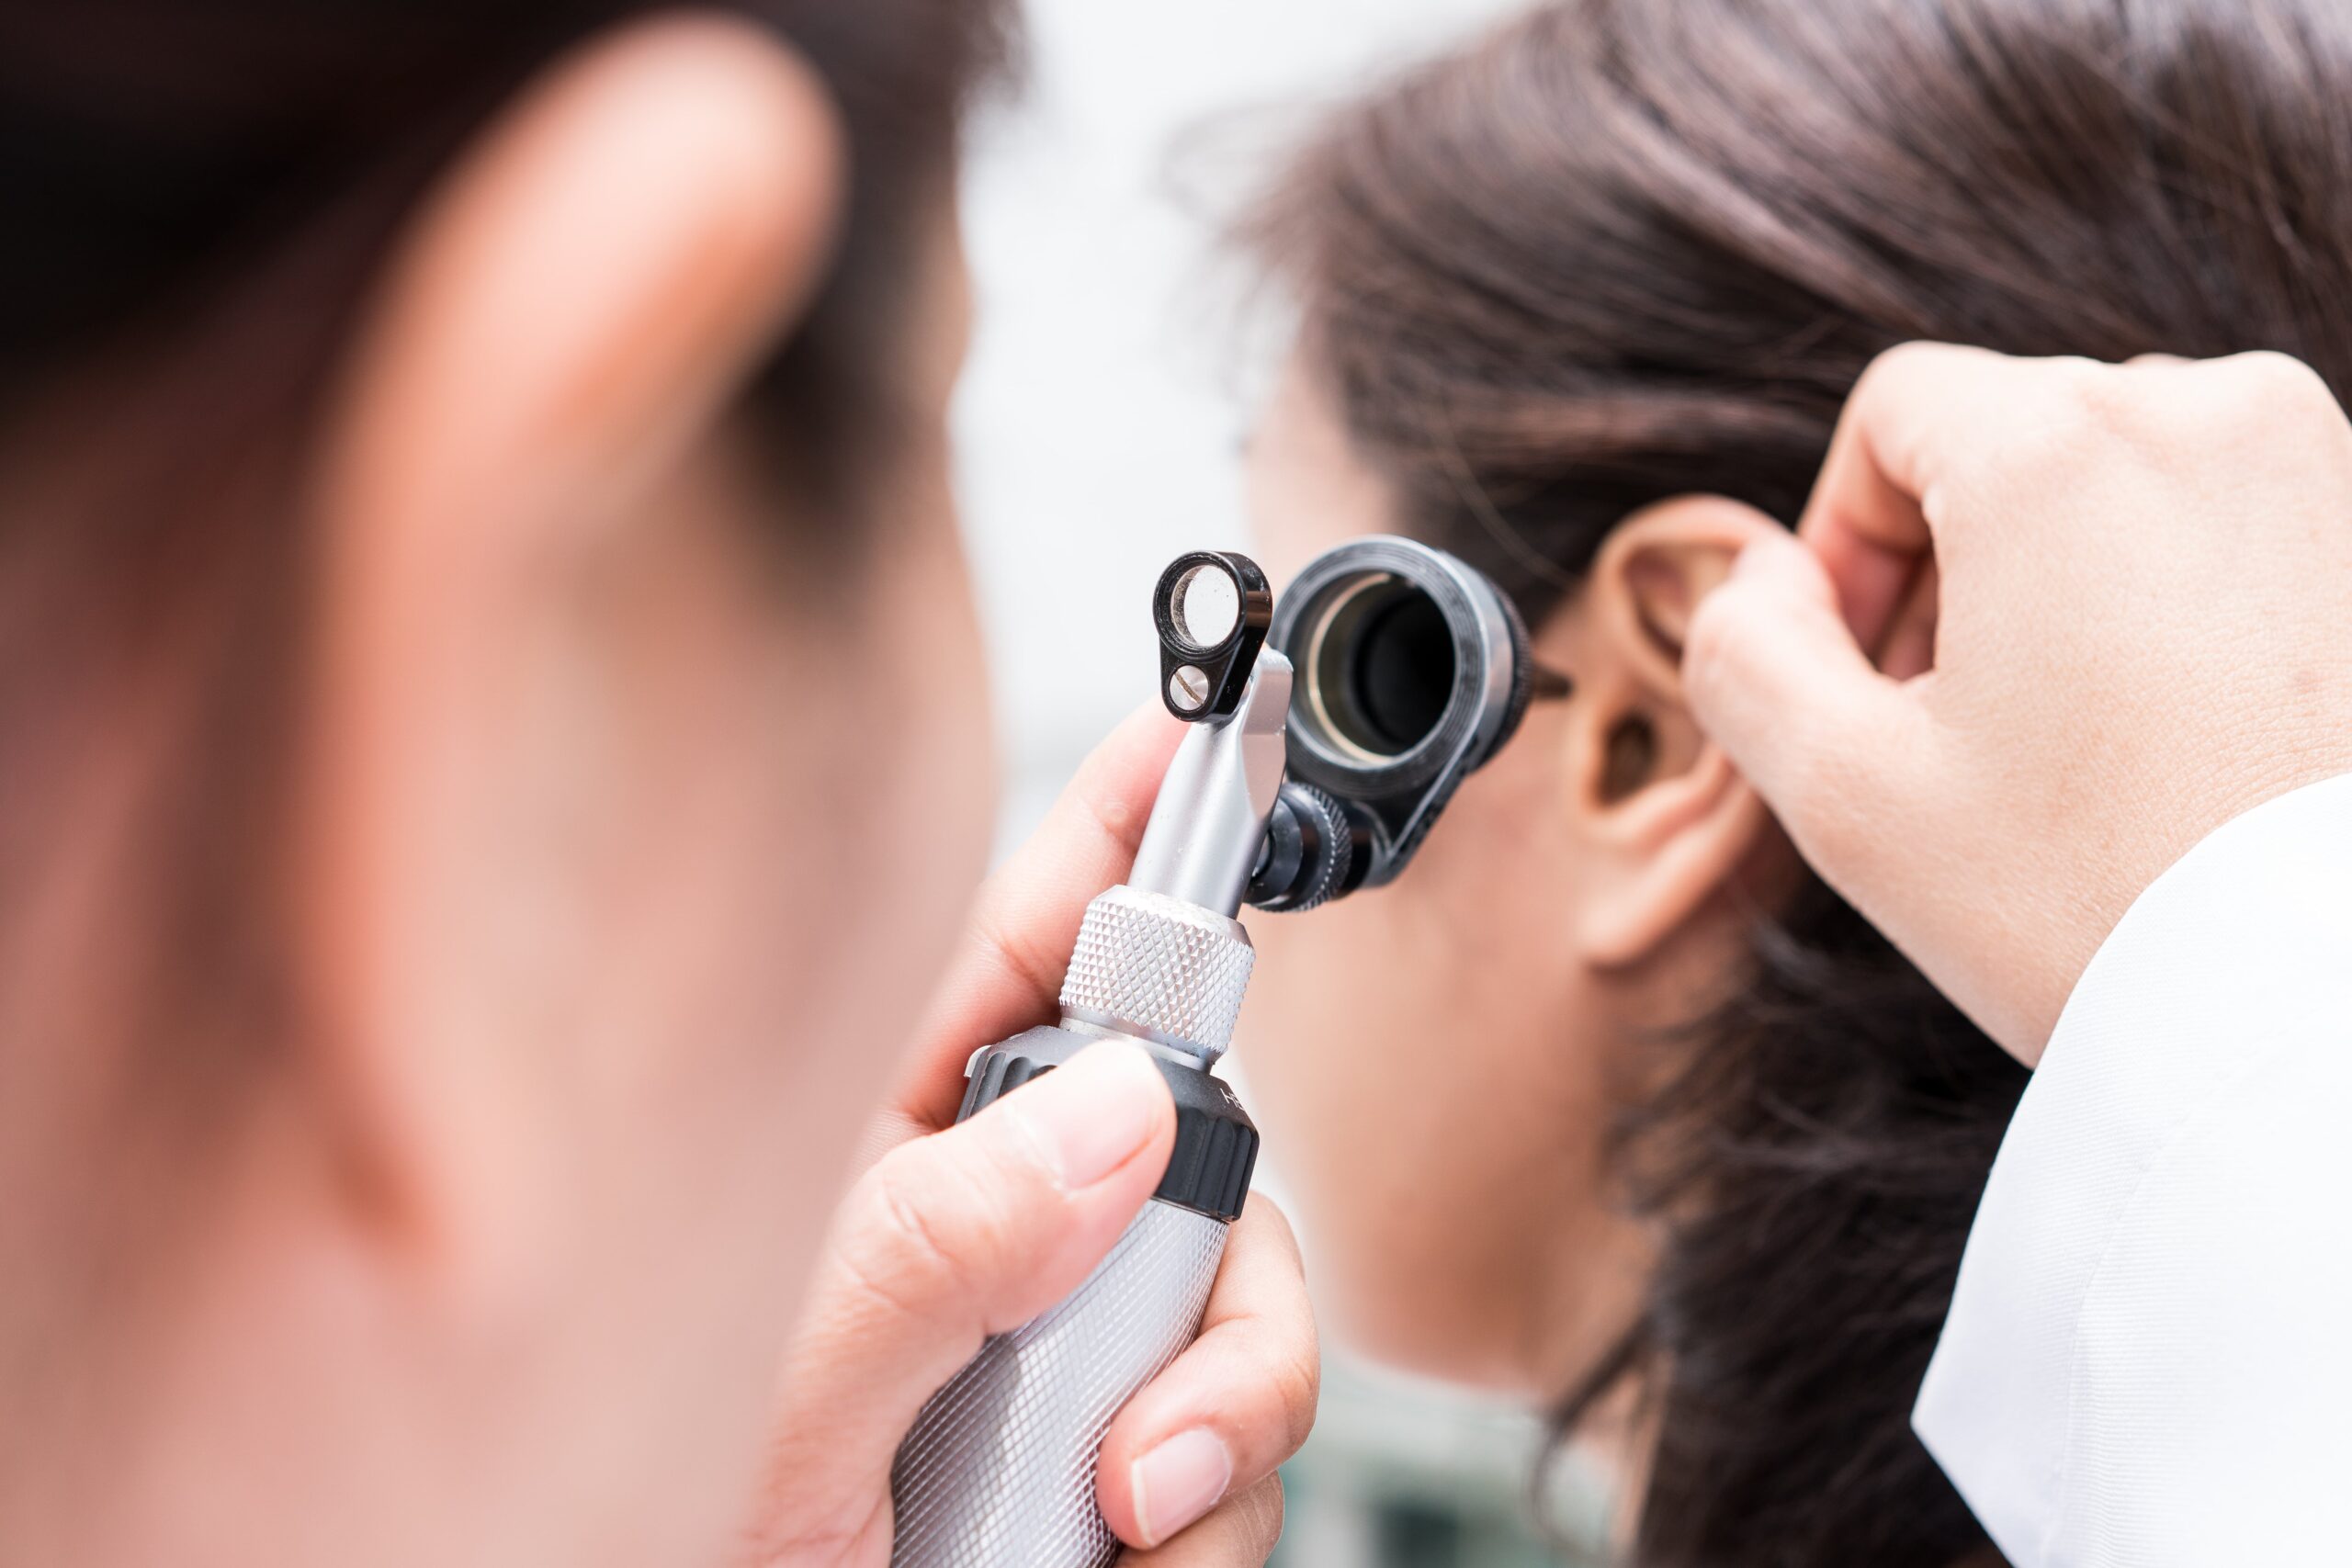 A closeup image of a doctor examining a woman’s ear canal using an otoscope.